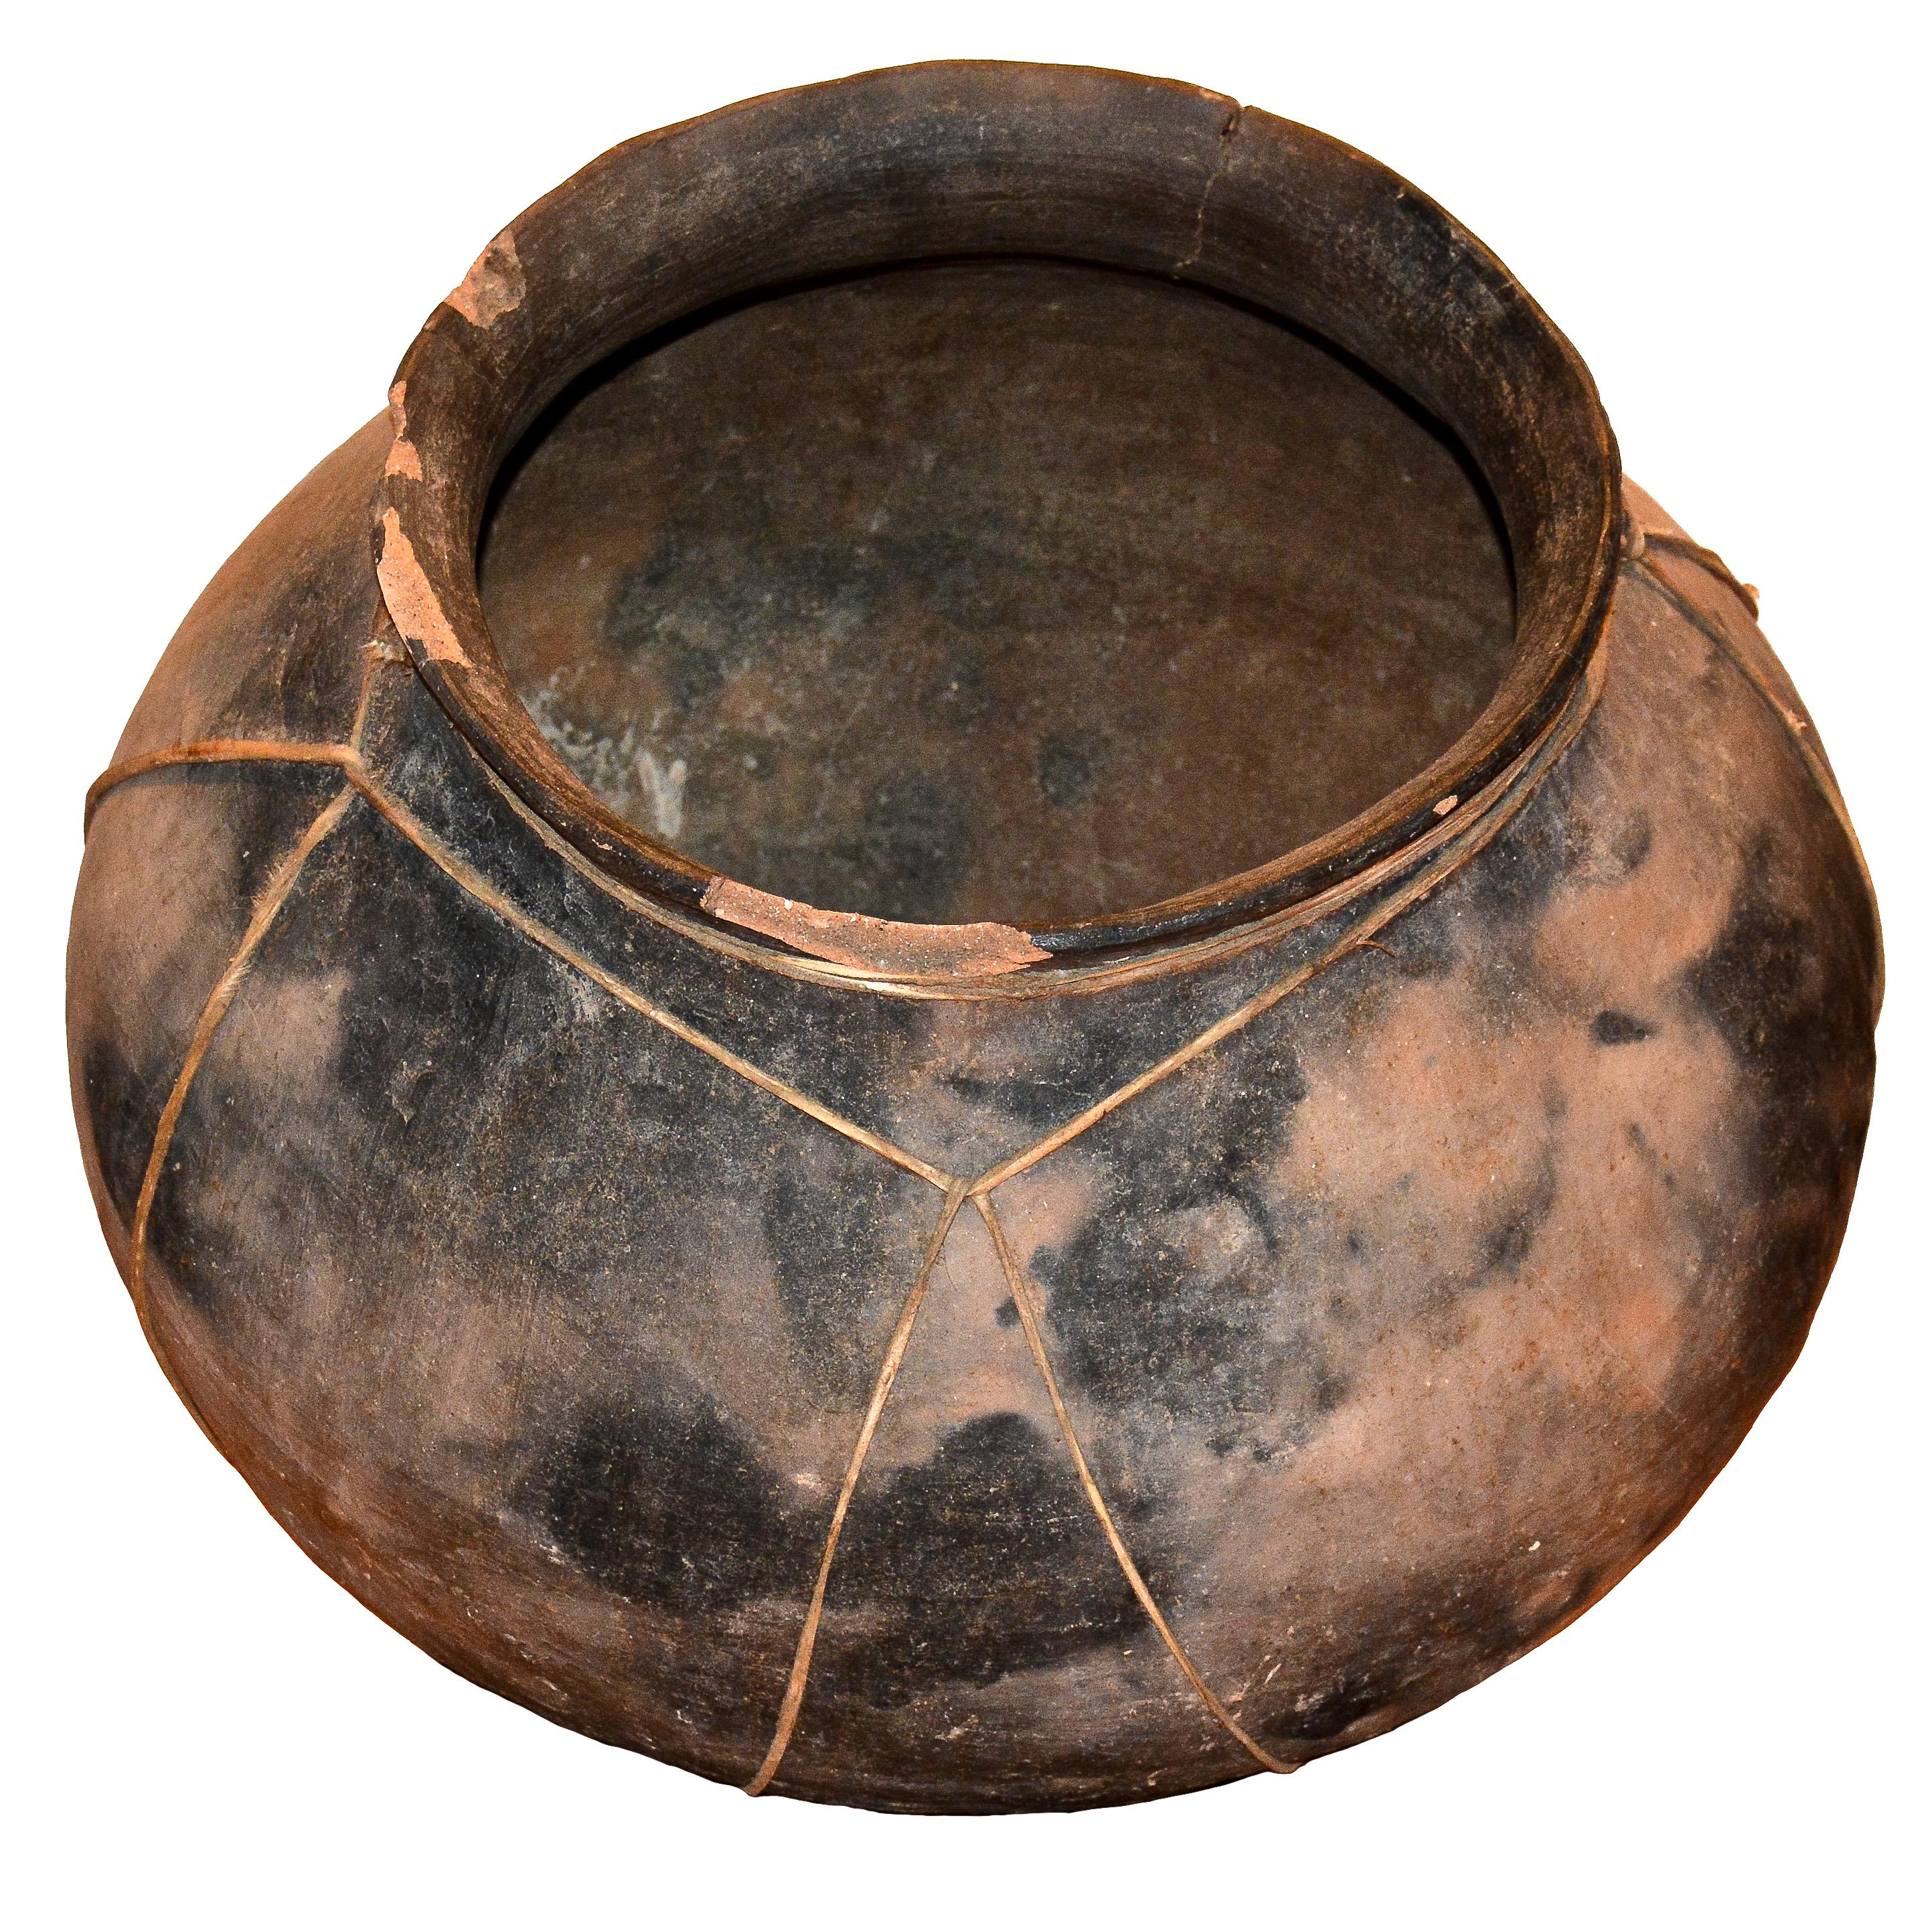 Vintage large Tarahumara Indian beer fermenting pot
Sierra Tarahumara Mountains, Chihuahua, Mexico
1940s
Low fire clay, pitch, rawhide
Measures: 21 inches height x 19 inches in diameter

A large, vintage, and rare example of the Tarahumara Indian